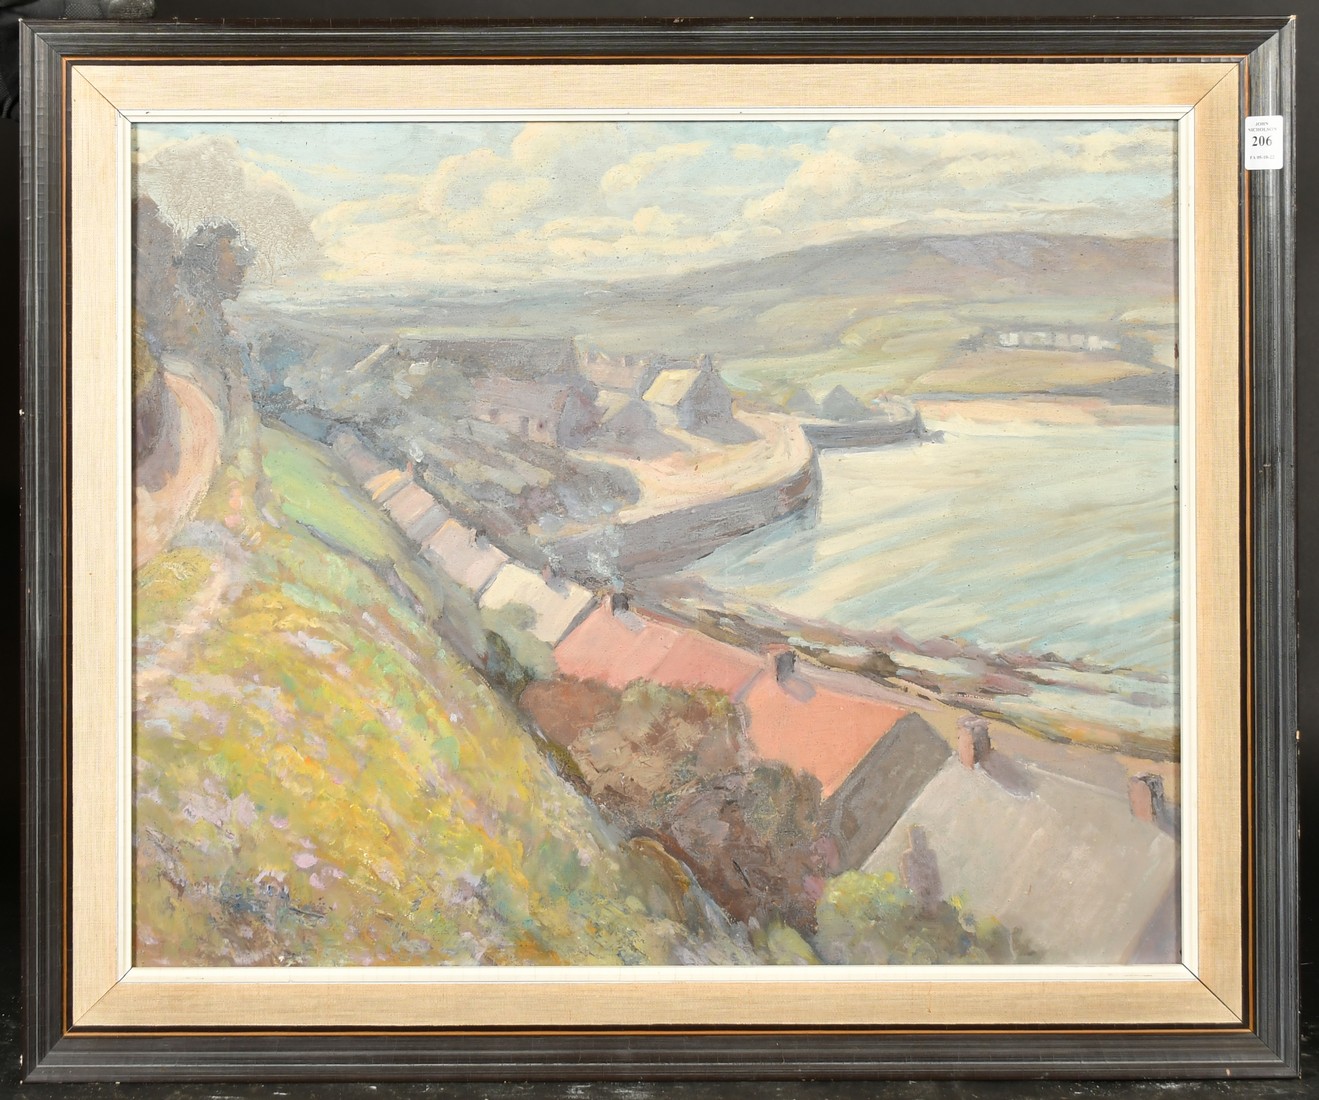 Odell, 20th Century, Possibly Irish, a view of a harbour town, oil on board, 20" x 24" (50 x 61cm). - Image 2 of 4